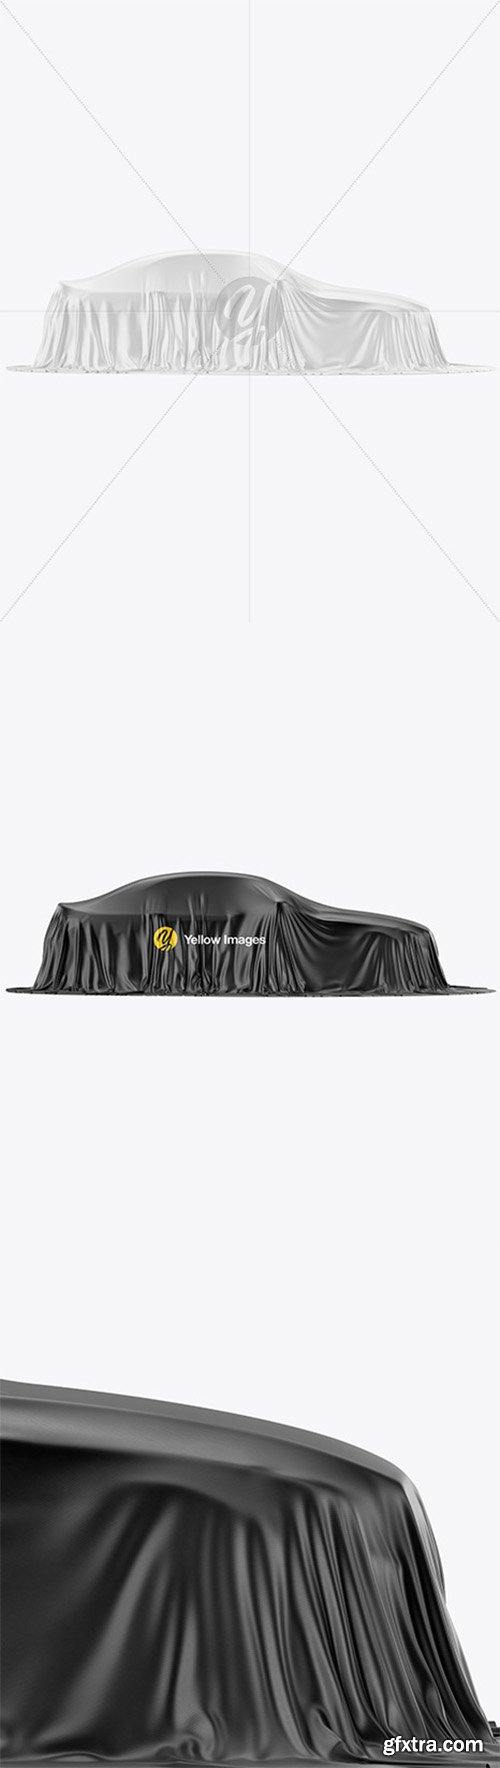 Download Car Cover Mockup Download Free And Premium Psd Mockup Templates And Design Assets PSD Mockup Templates